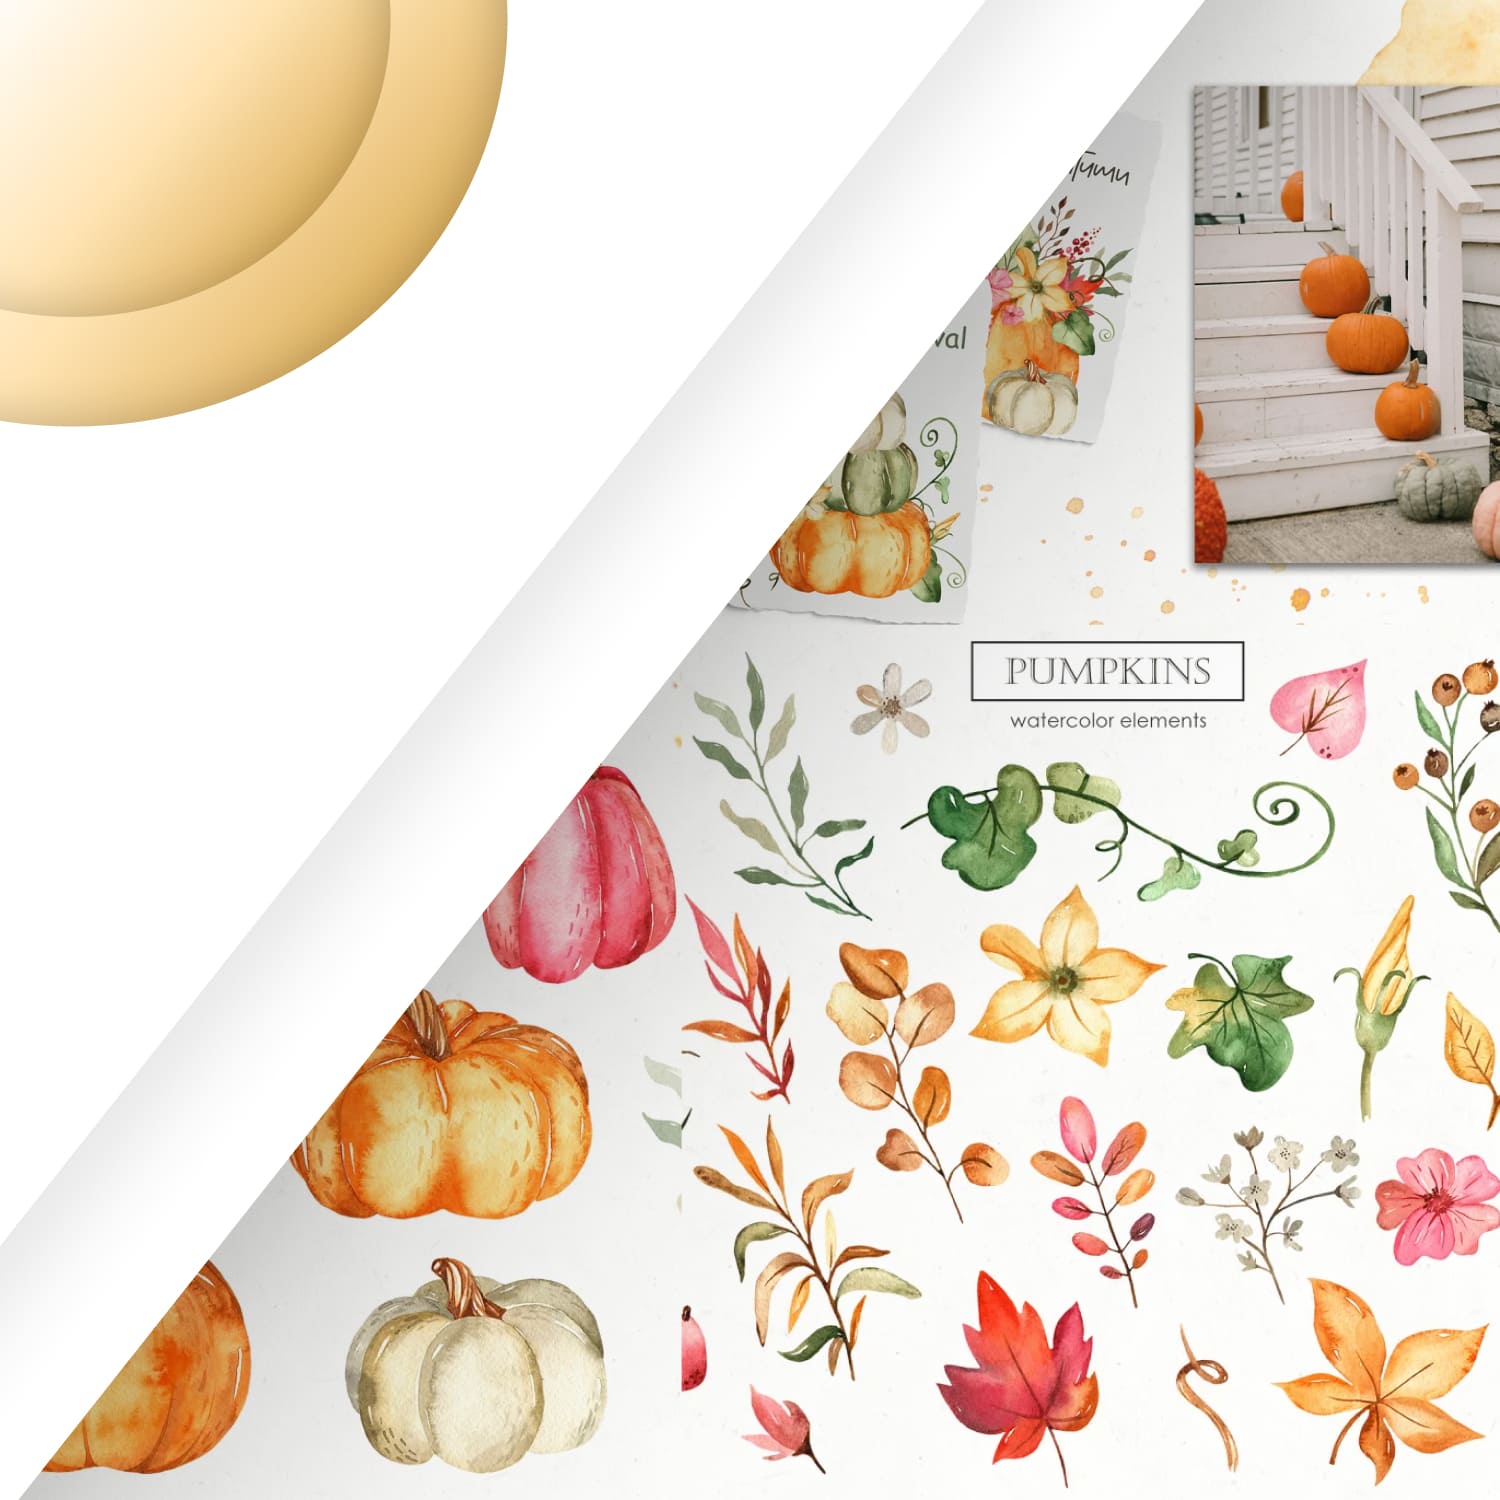 Pumpkins watercolor collection cover.